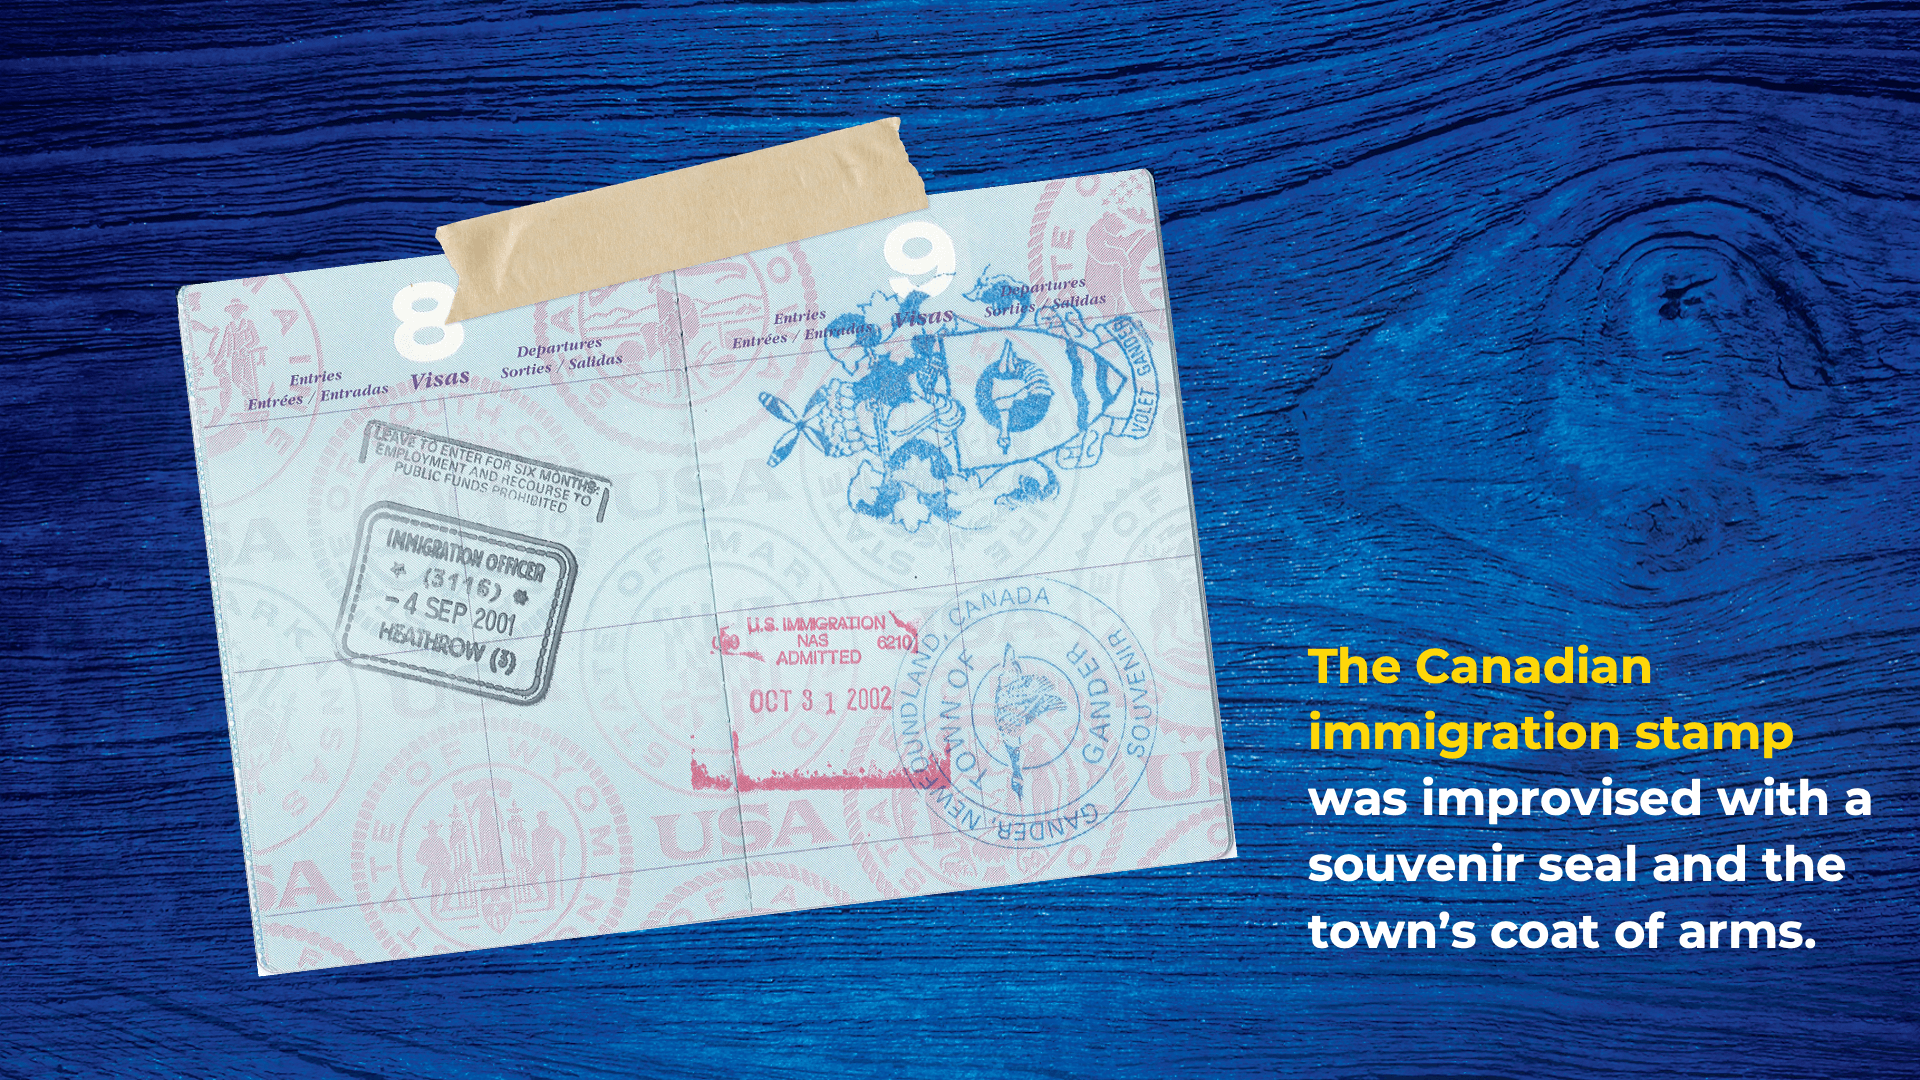 The Canadian immigration stamp was improvised with a souvenir seal and the town’s coat of arms.